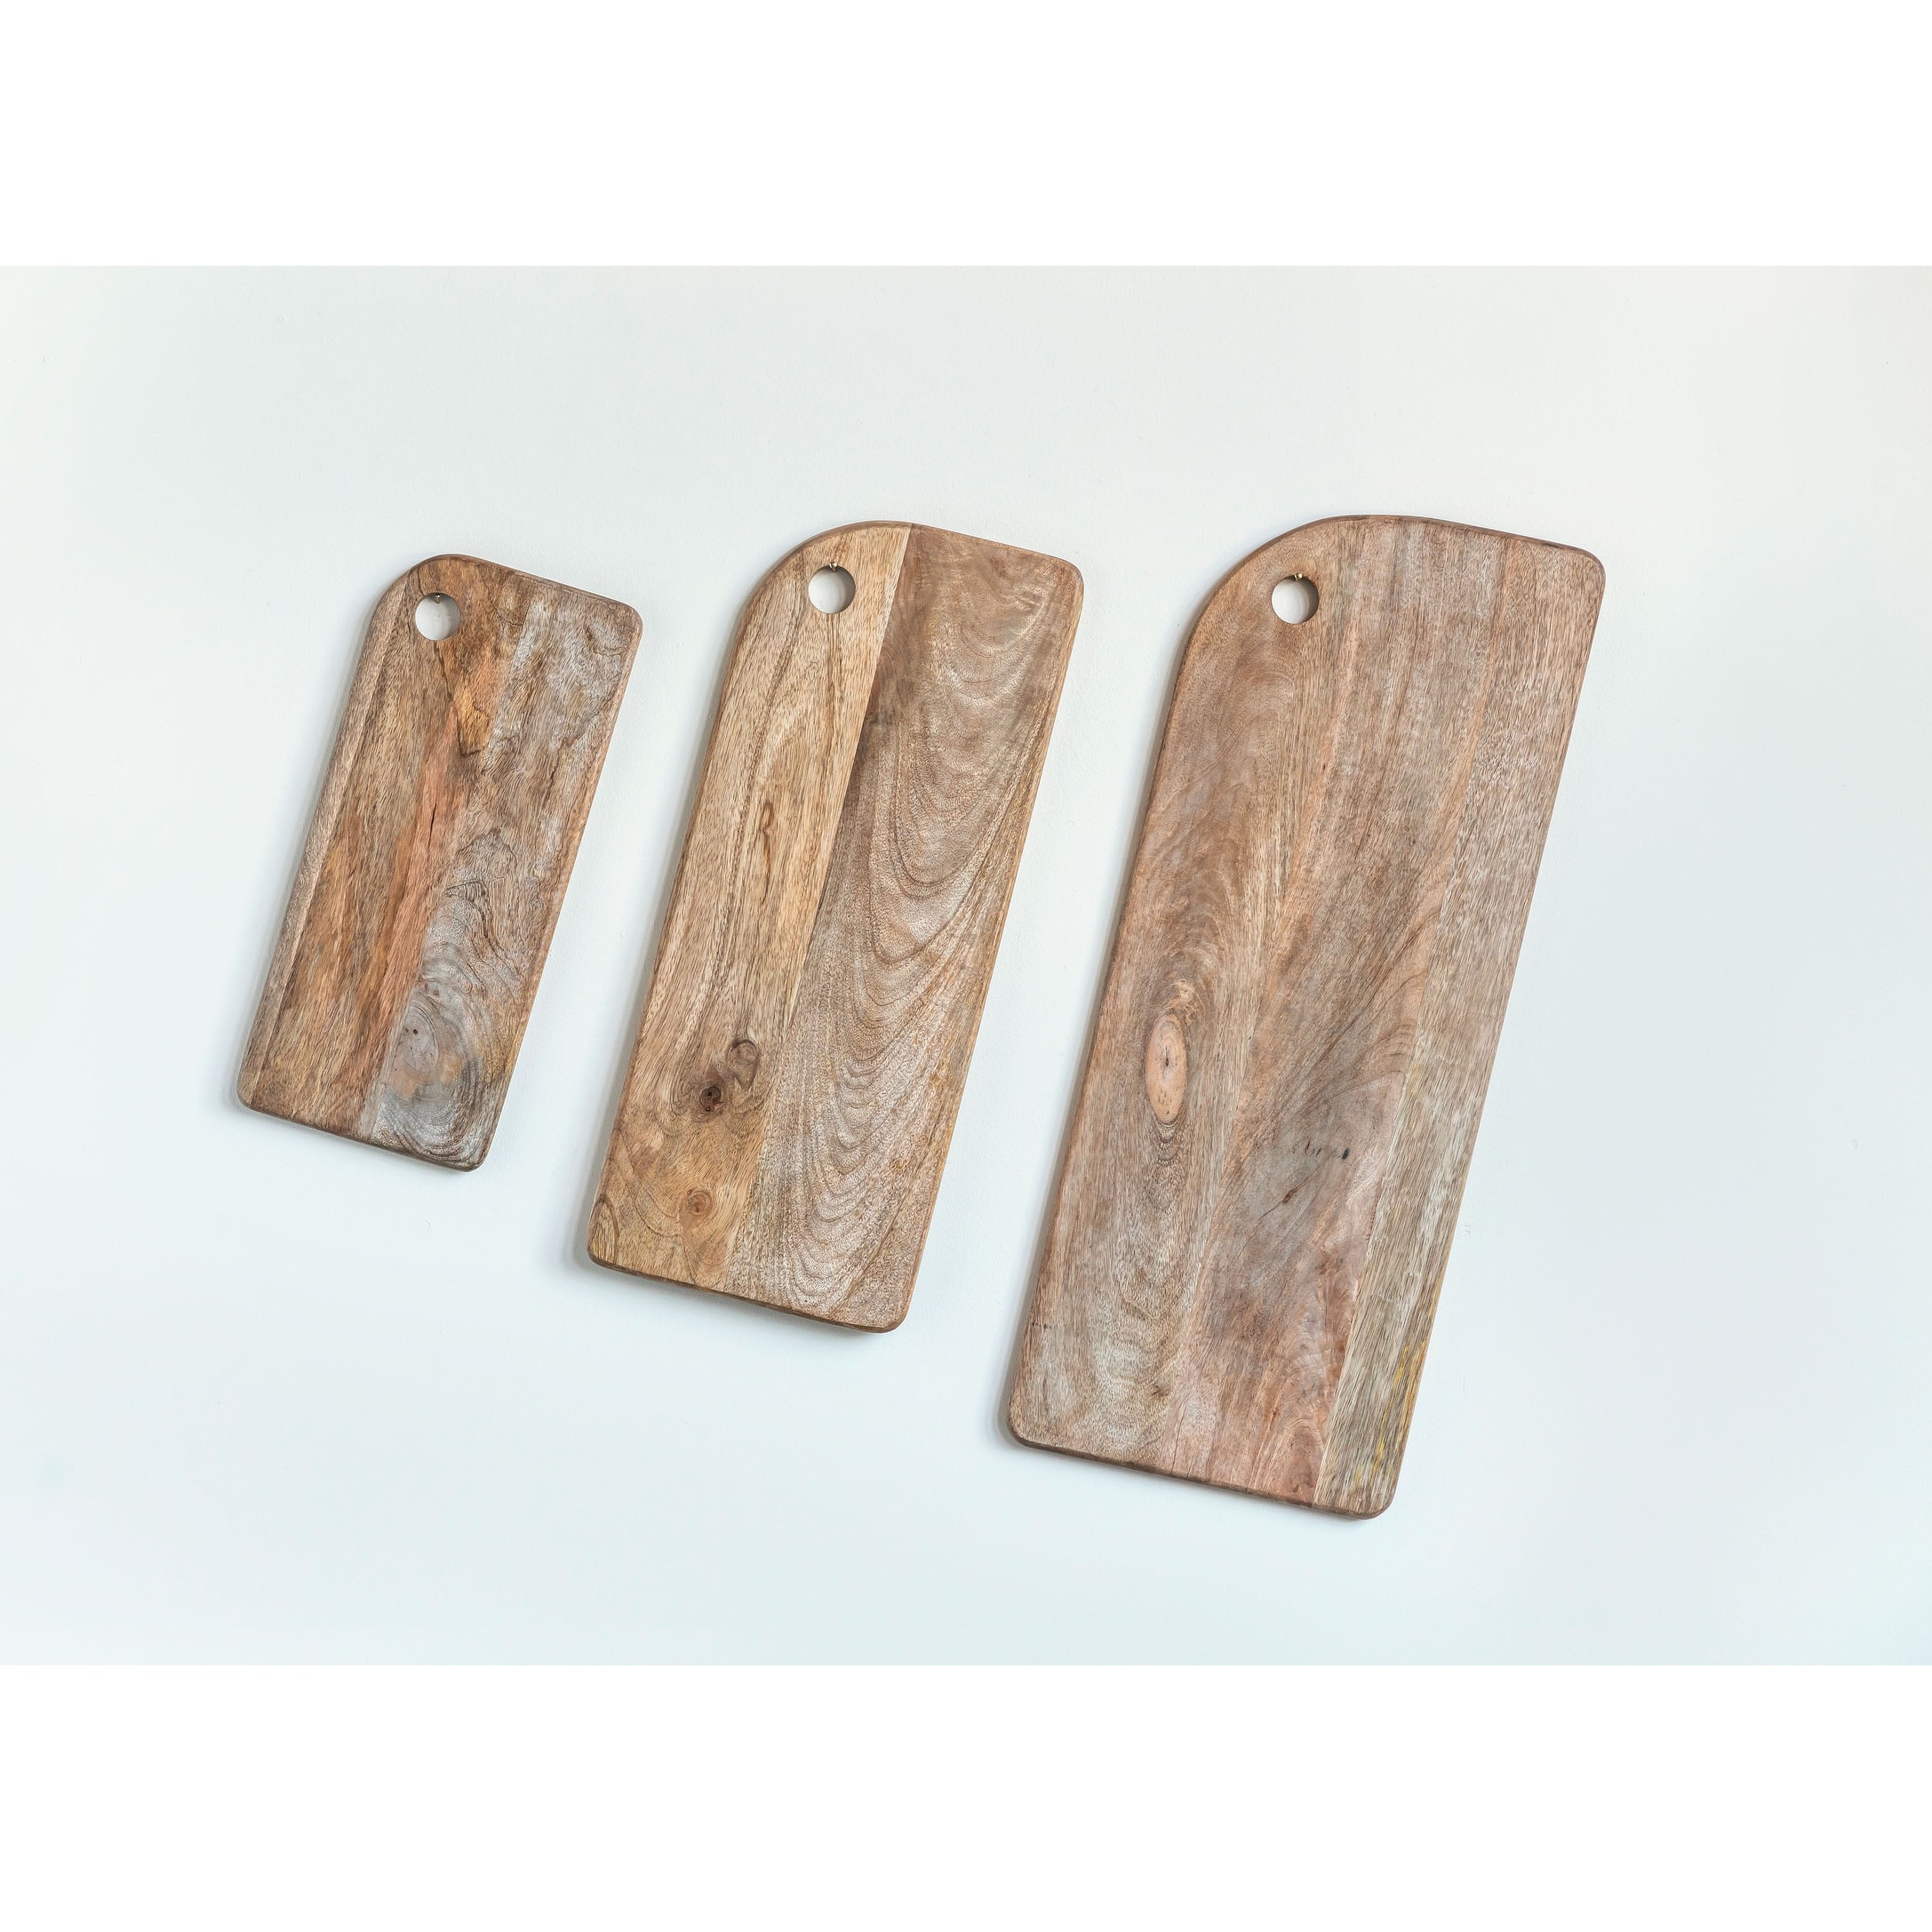 https://ak1.ostkcdn.com/images/products/is/images/direct/637d17ed7e7247bc95180f6030f73a9c3d59d279/Rectangle-Mango-Wood-Cheese-Cutting-Boards-%28Set-of-3-Sizes%29.jpg